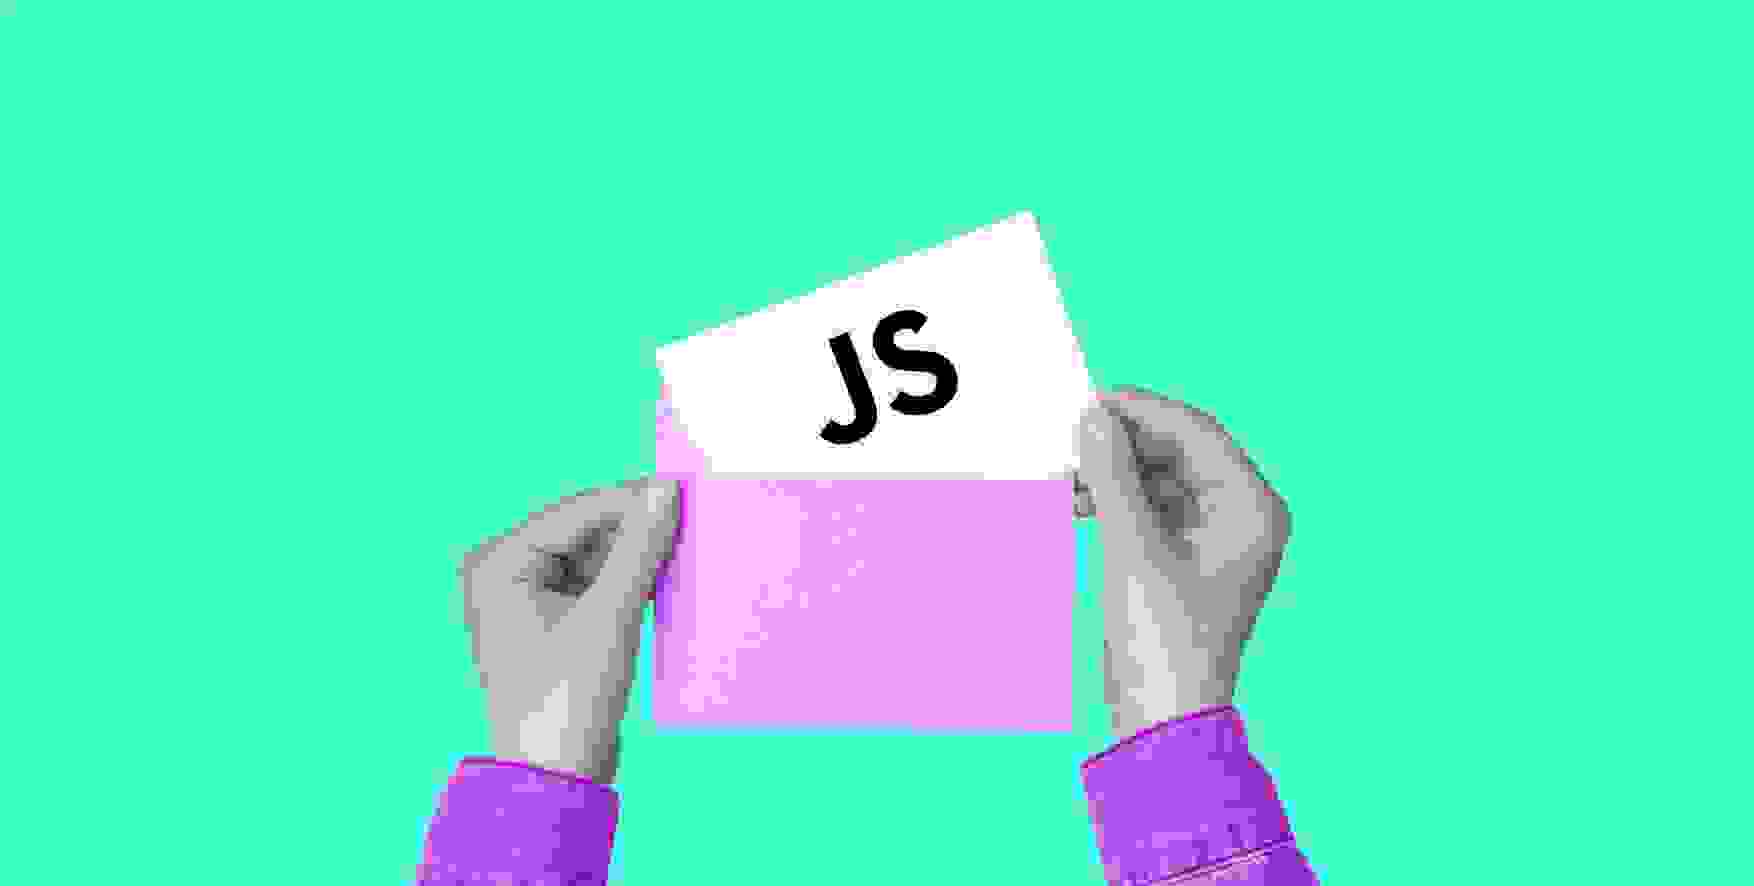 a sheet of paper with a symbol of JavaScript in an envelope